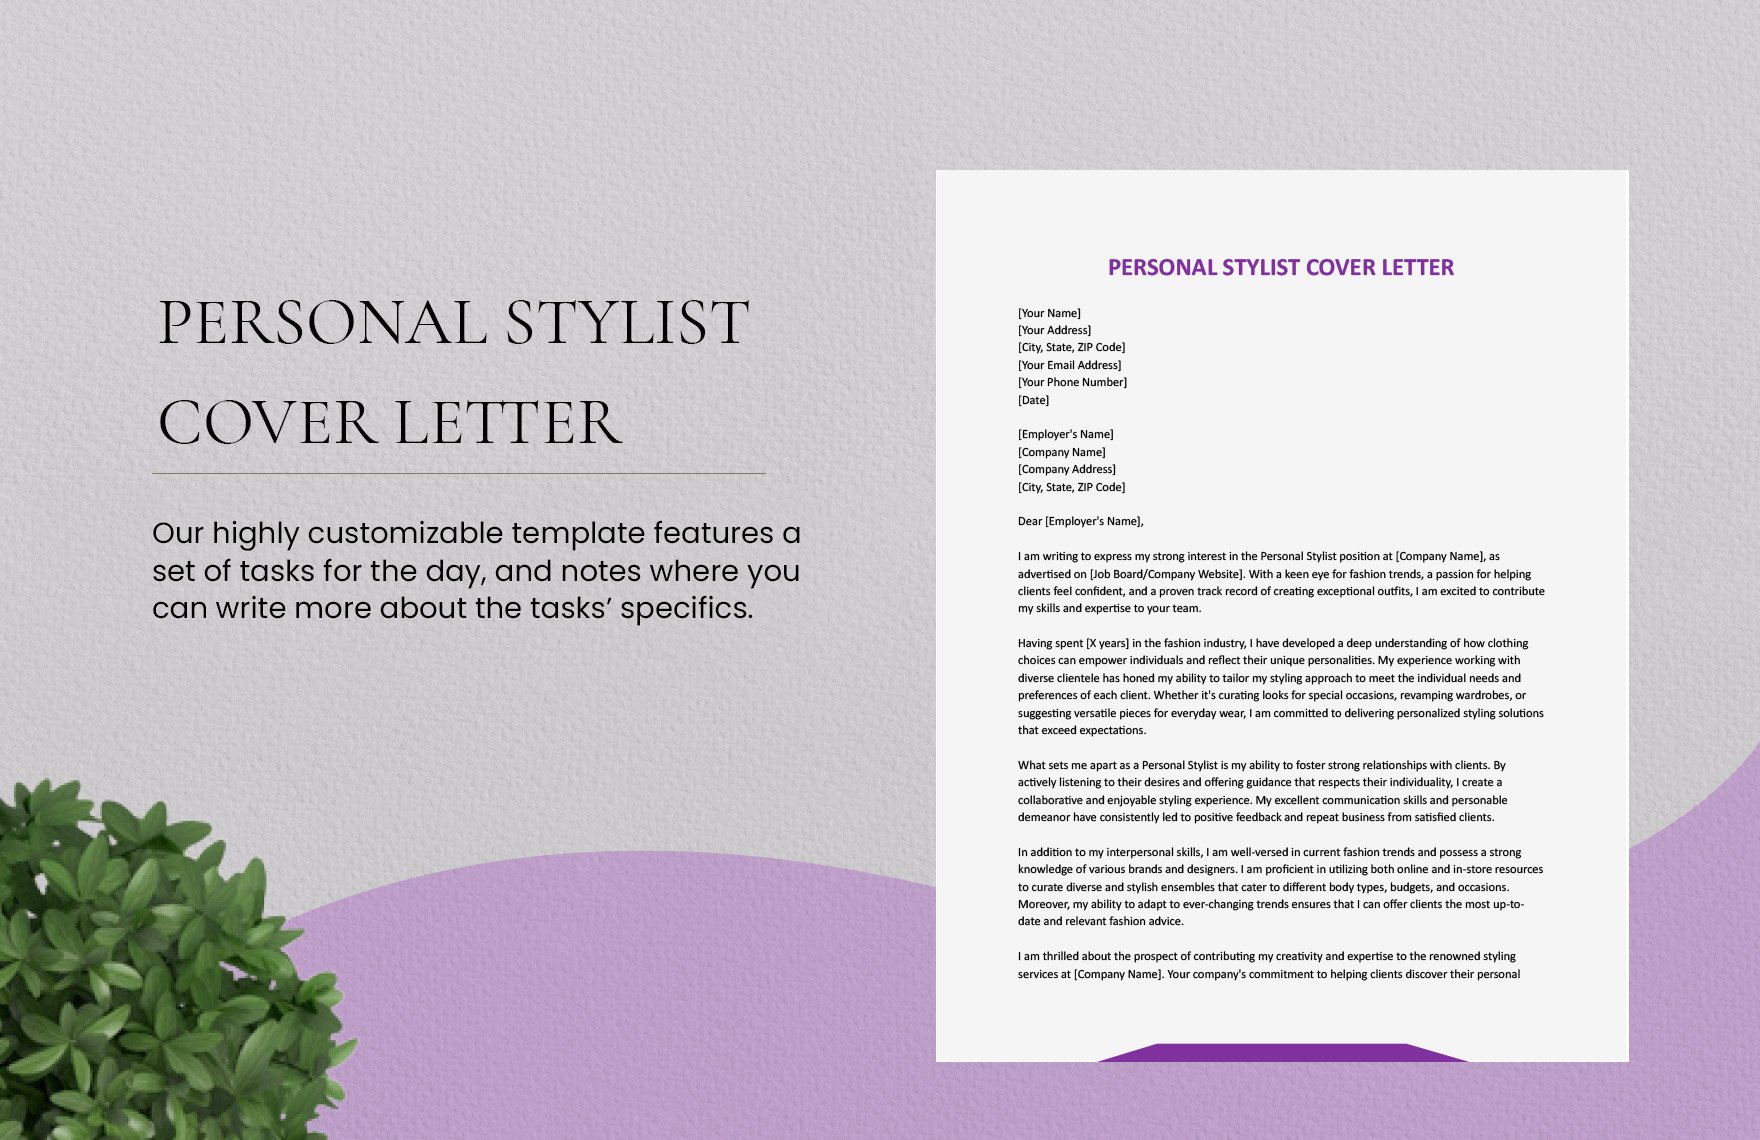 Personal Stylist Cover Letter